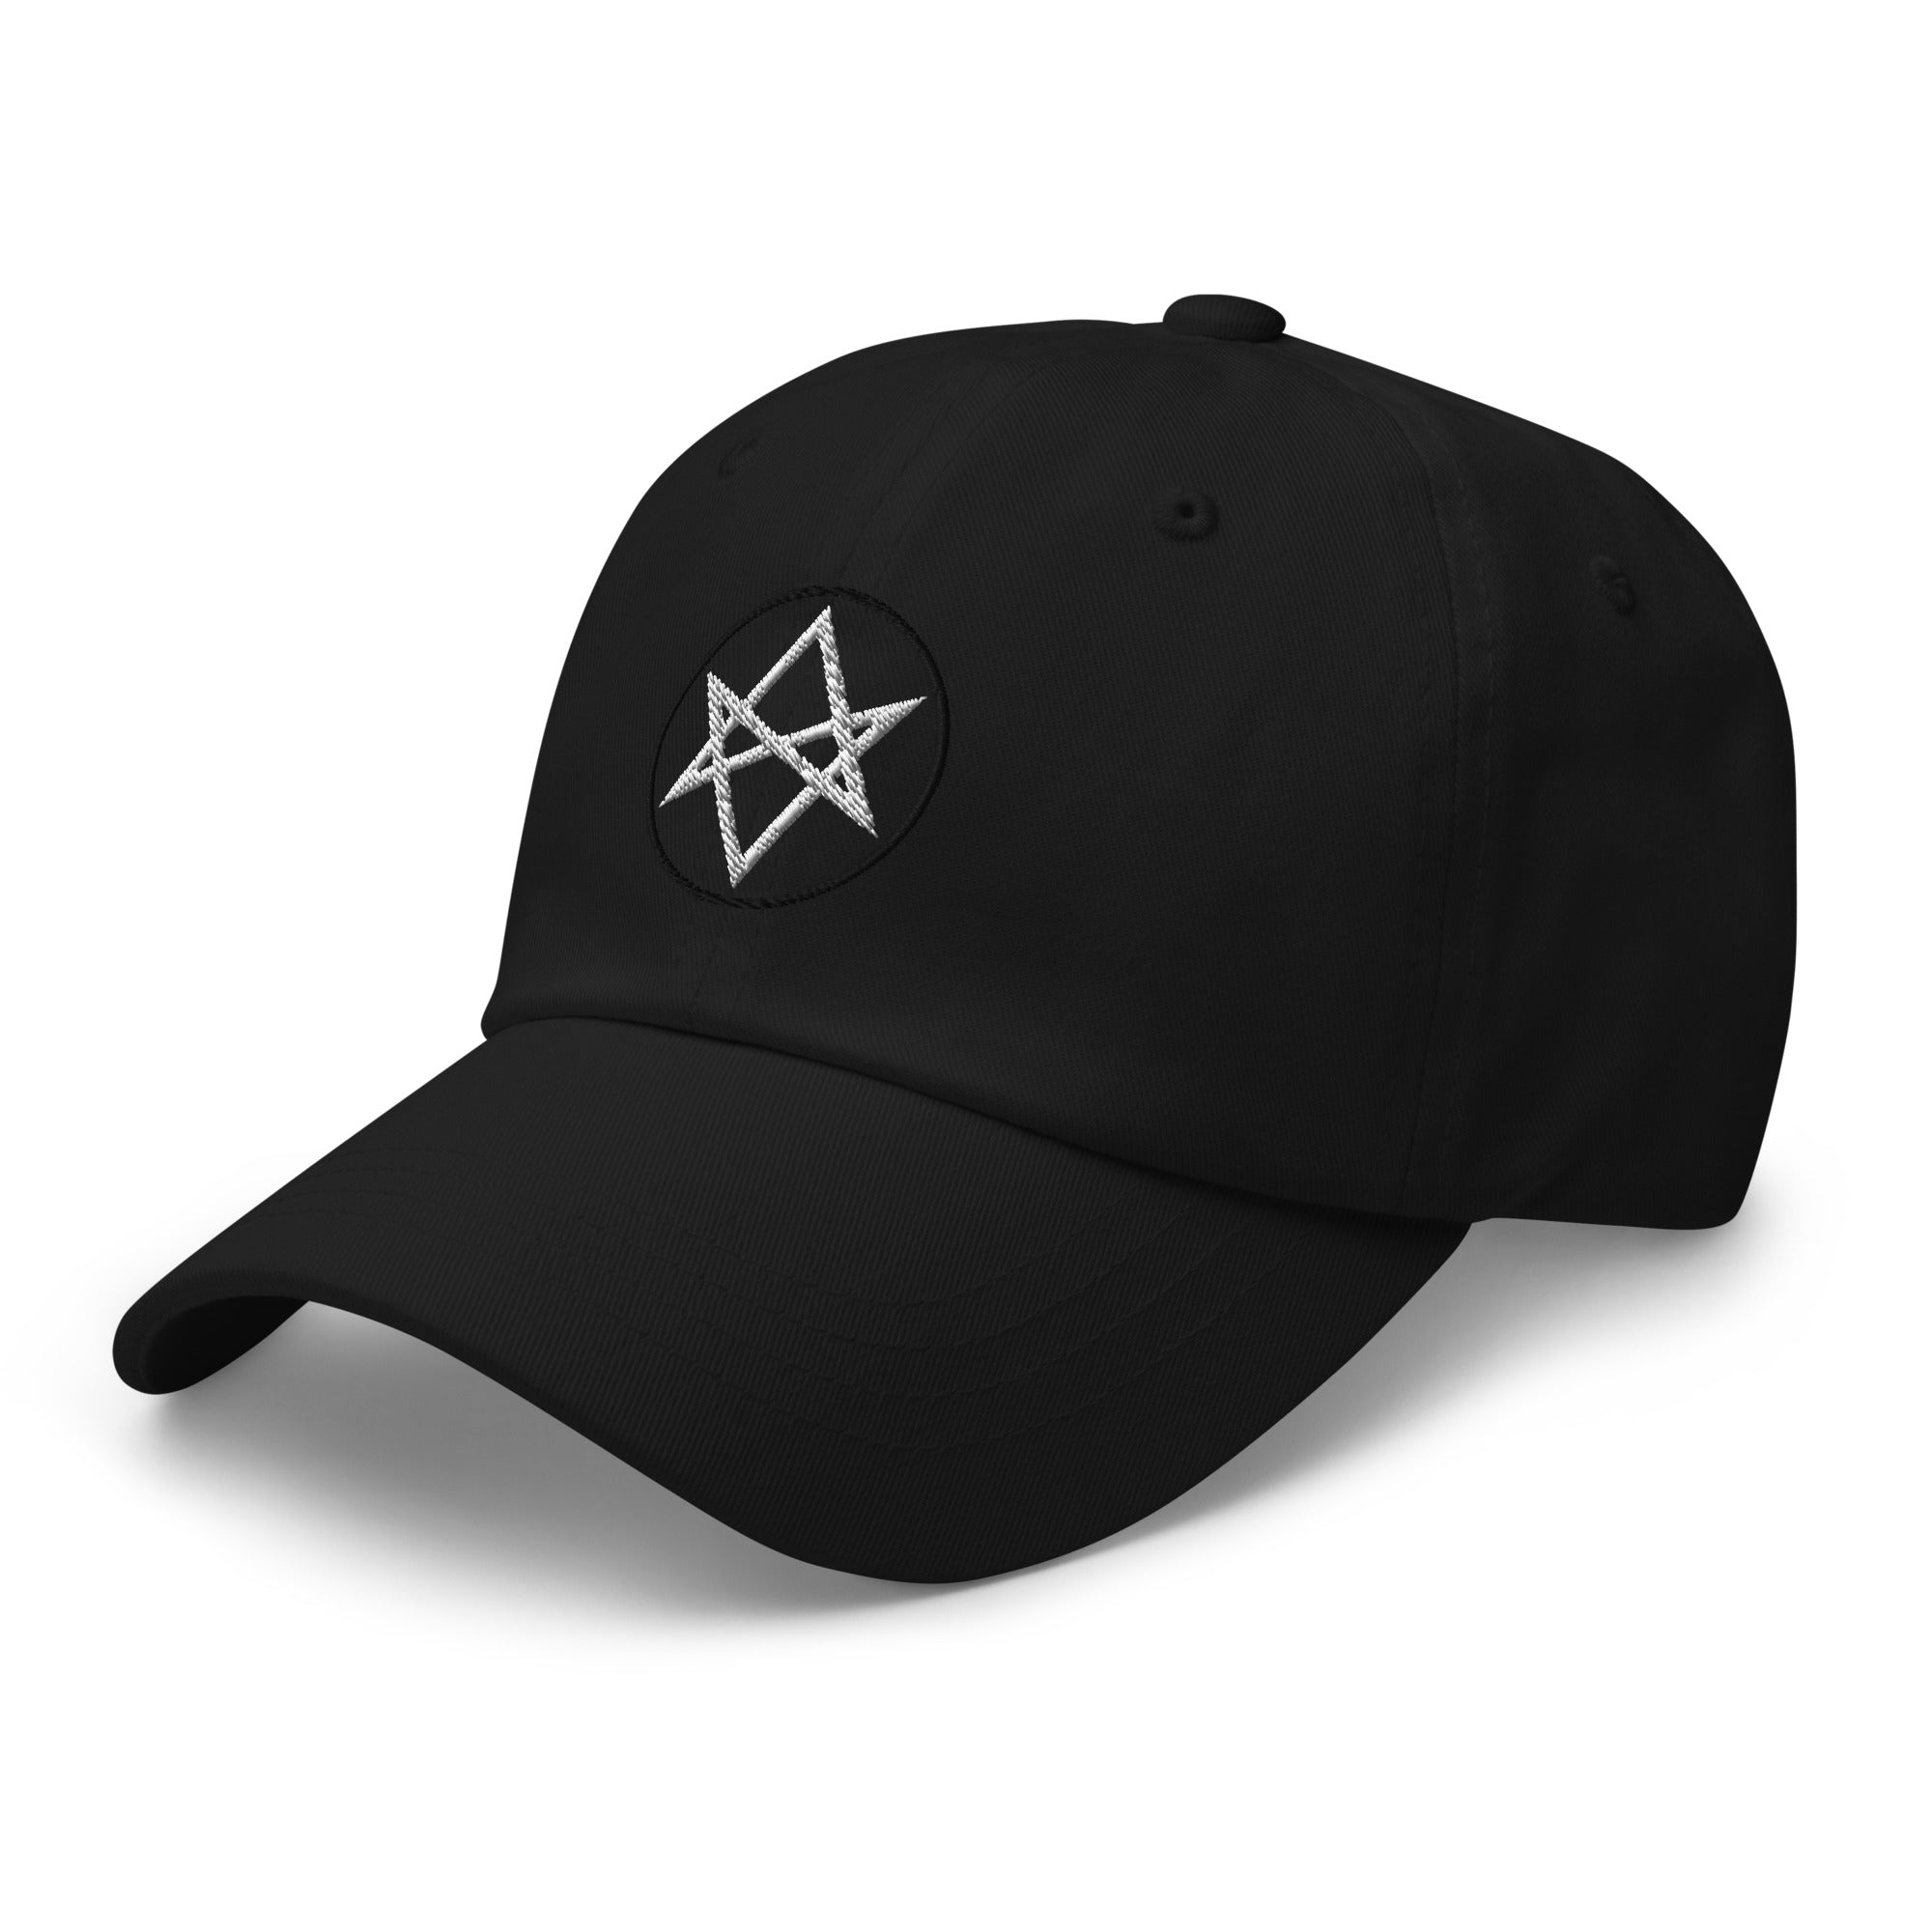 Unicursal Hexagram Six Pointed Star Occult Symbol Baseball Cap Embroidered Dad Hat - Edge of Life Designs